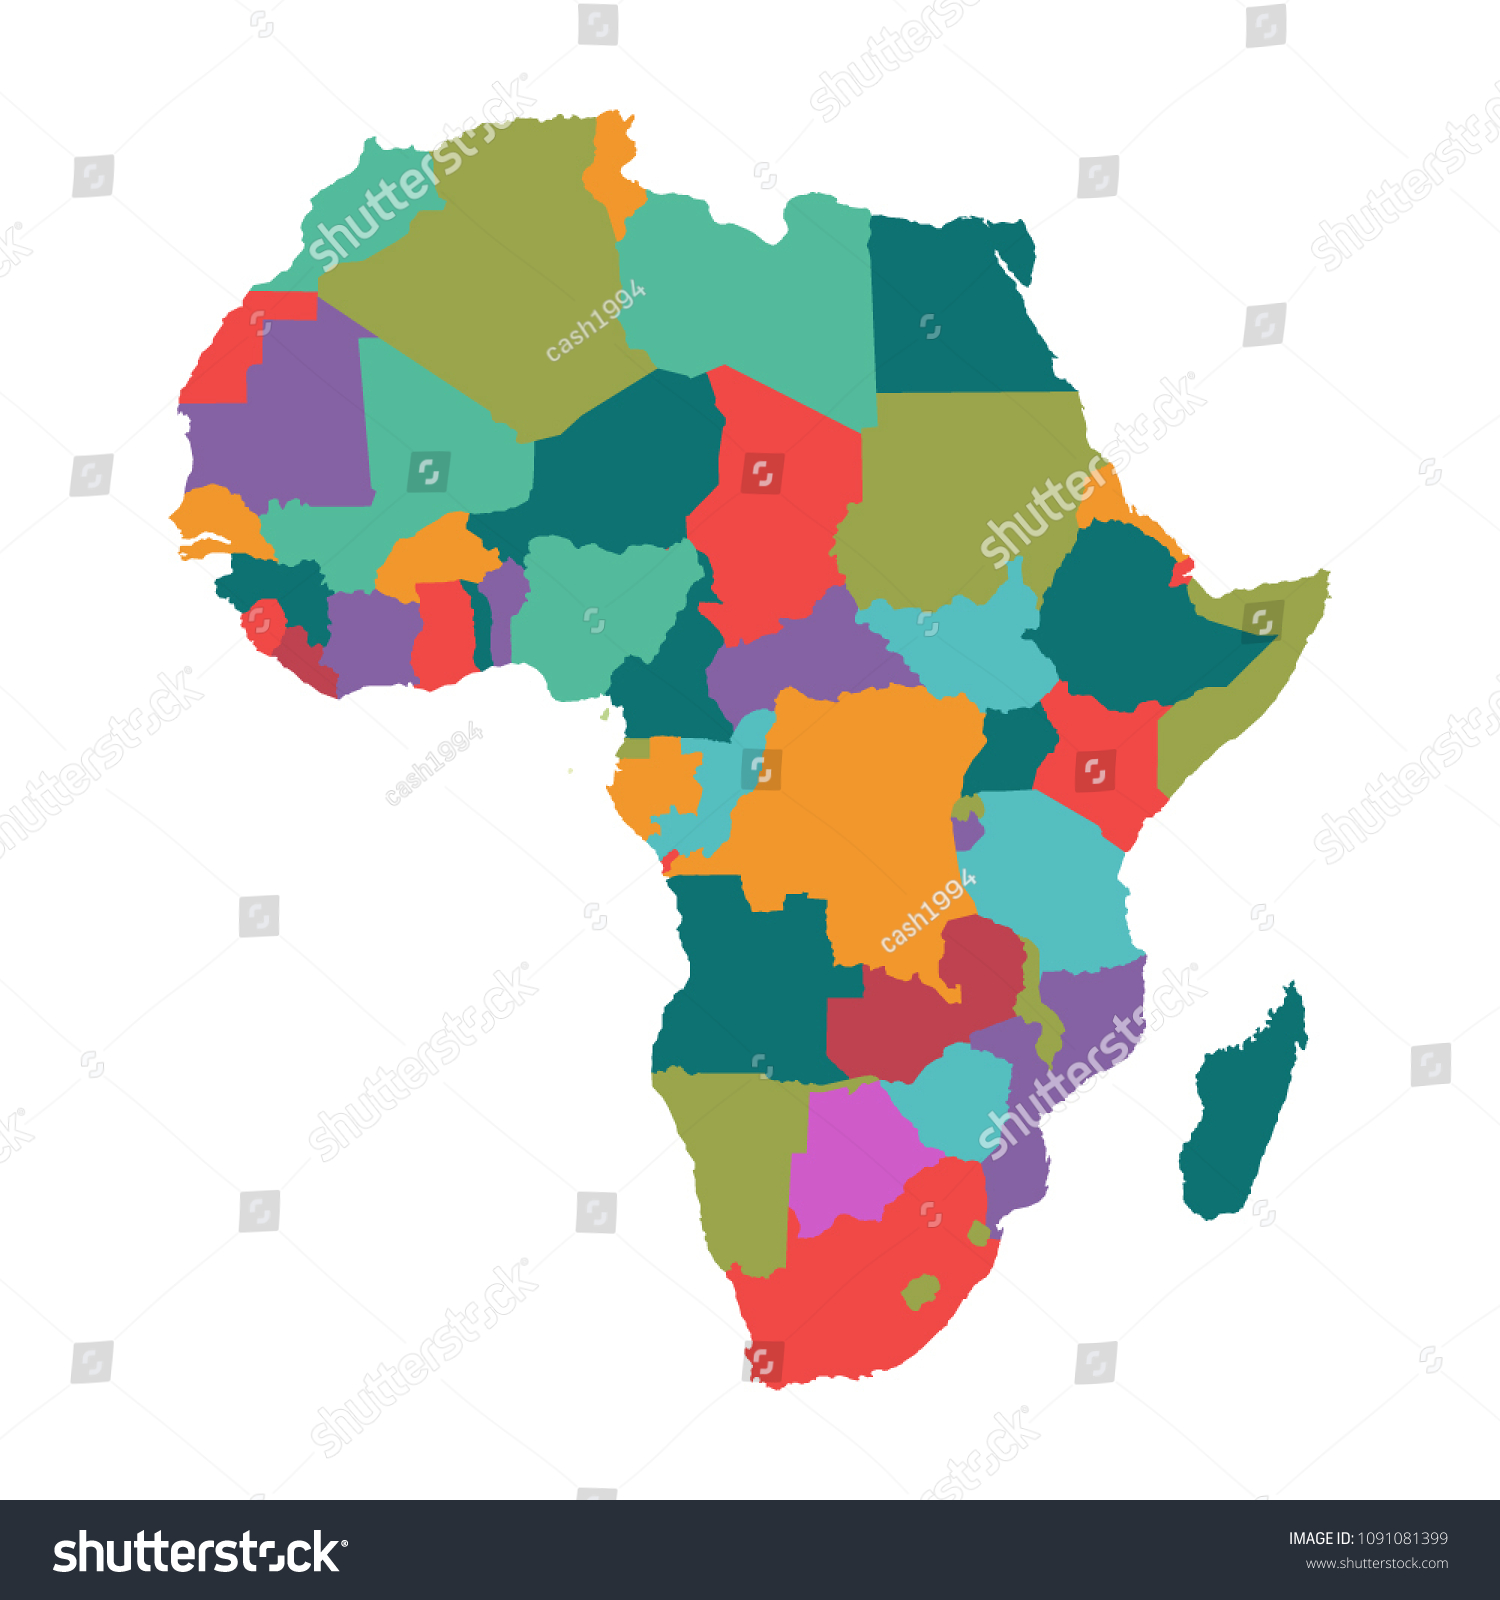 Political Map Africa Vector Stock Vector Royalty Free 1091081399 Shutterstock 6482